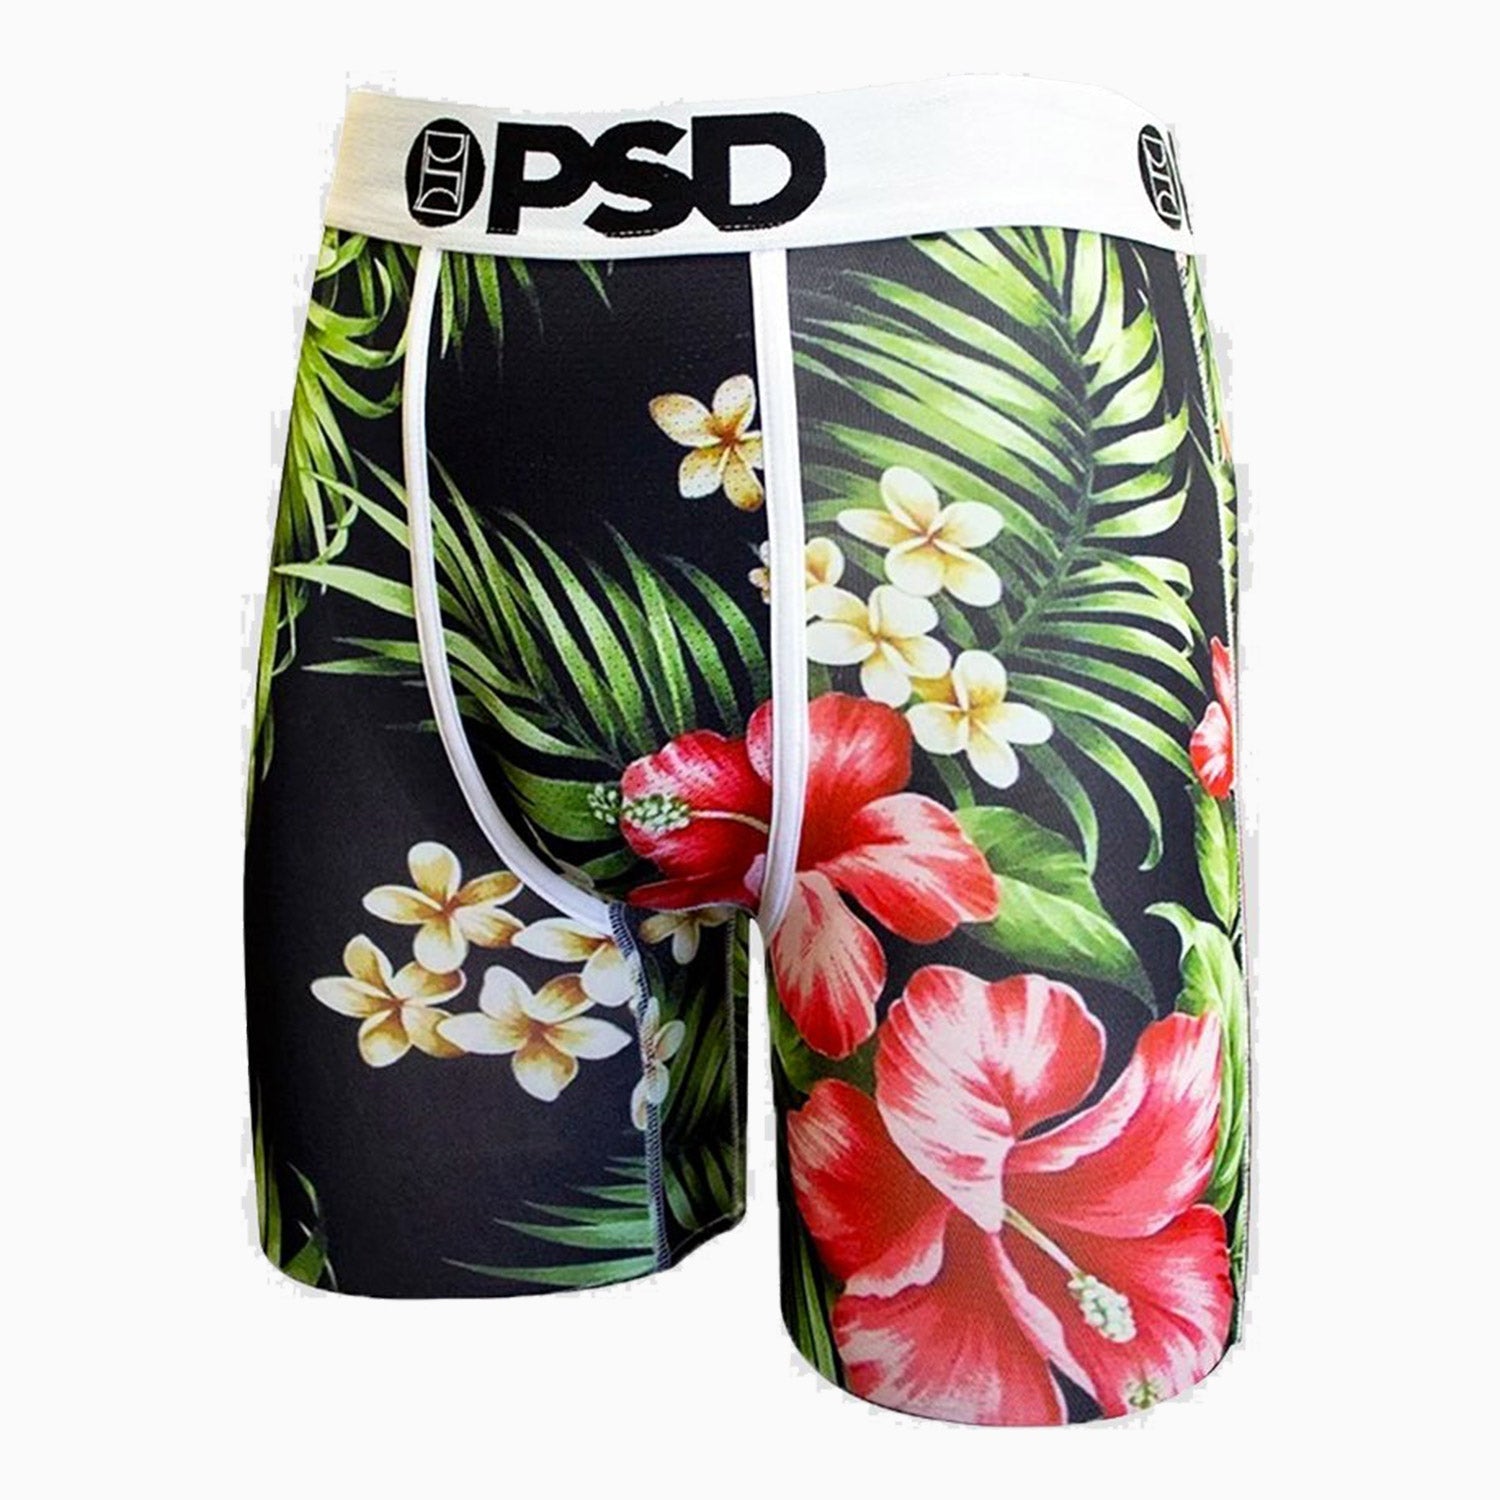 psd-underwear-mens-tropical-3-pack-boxer-121180087